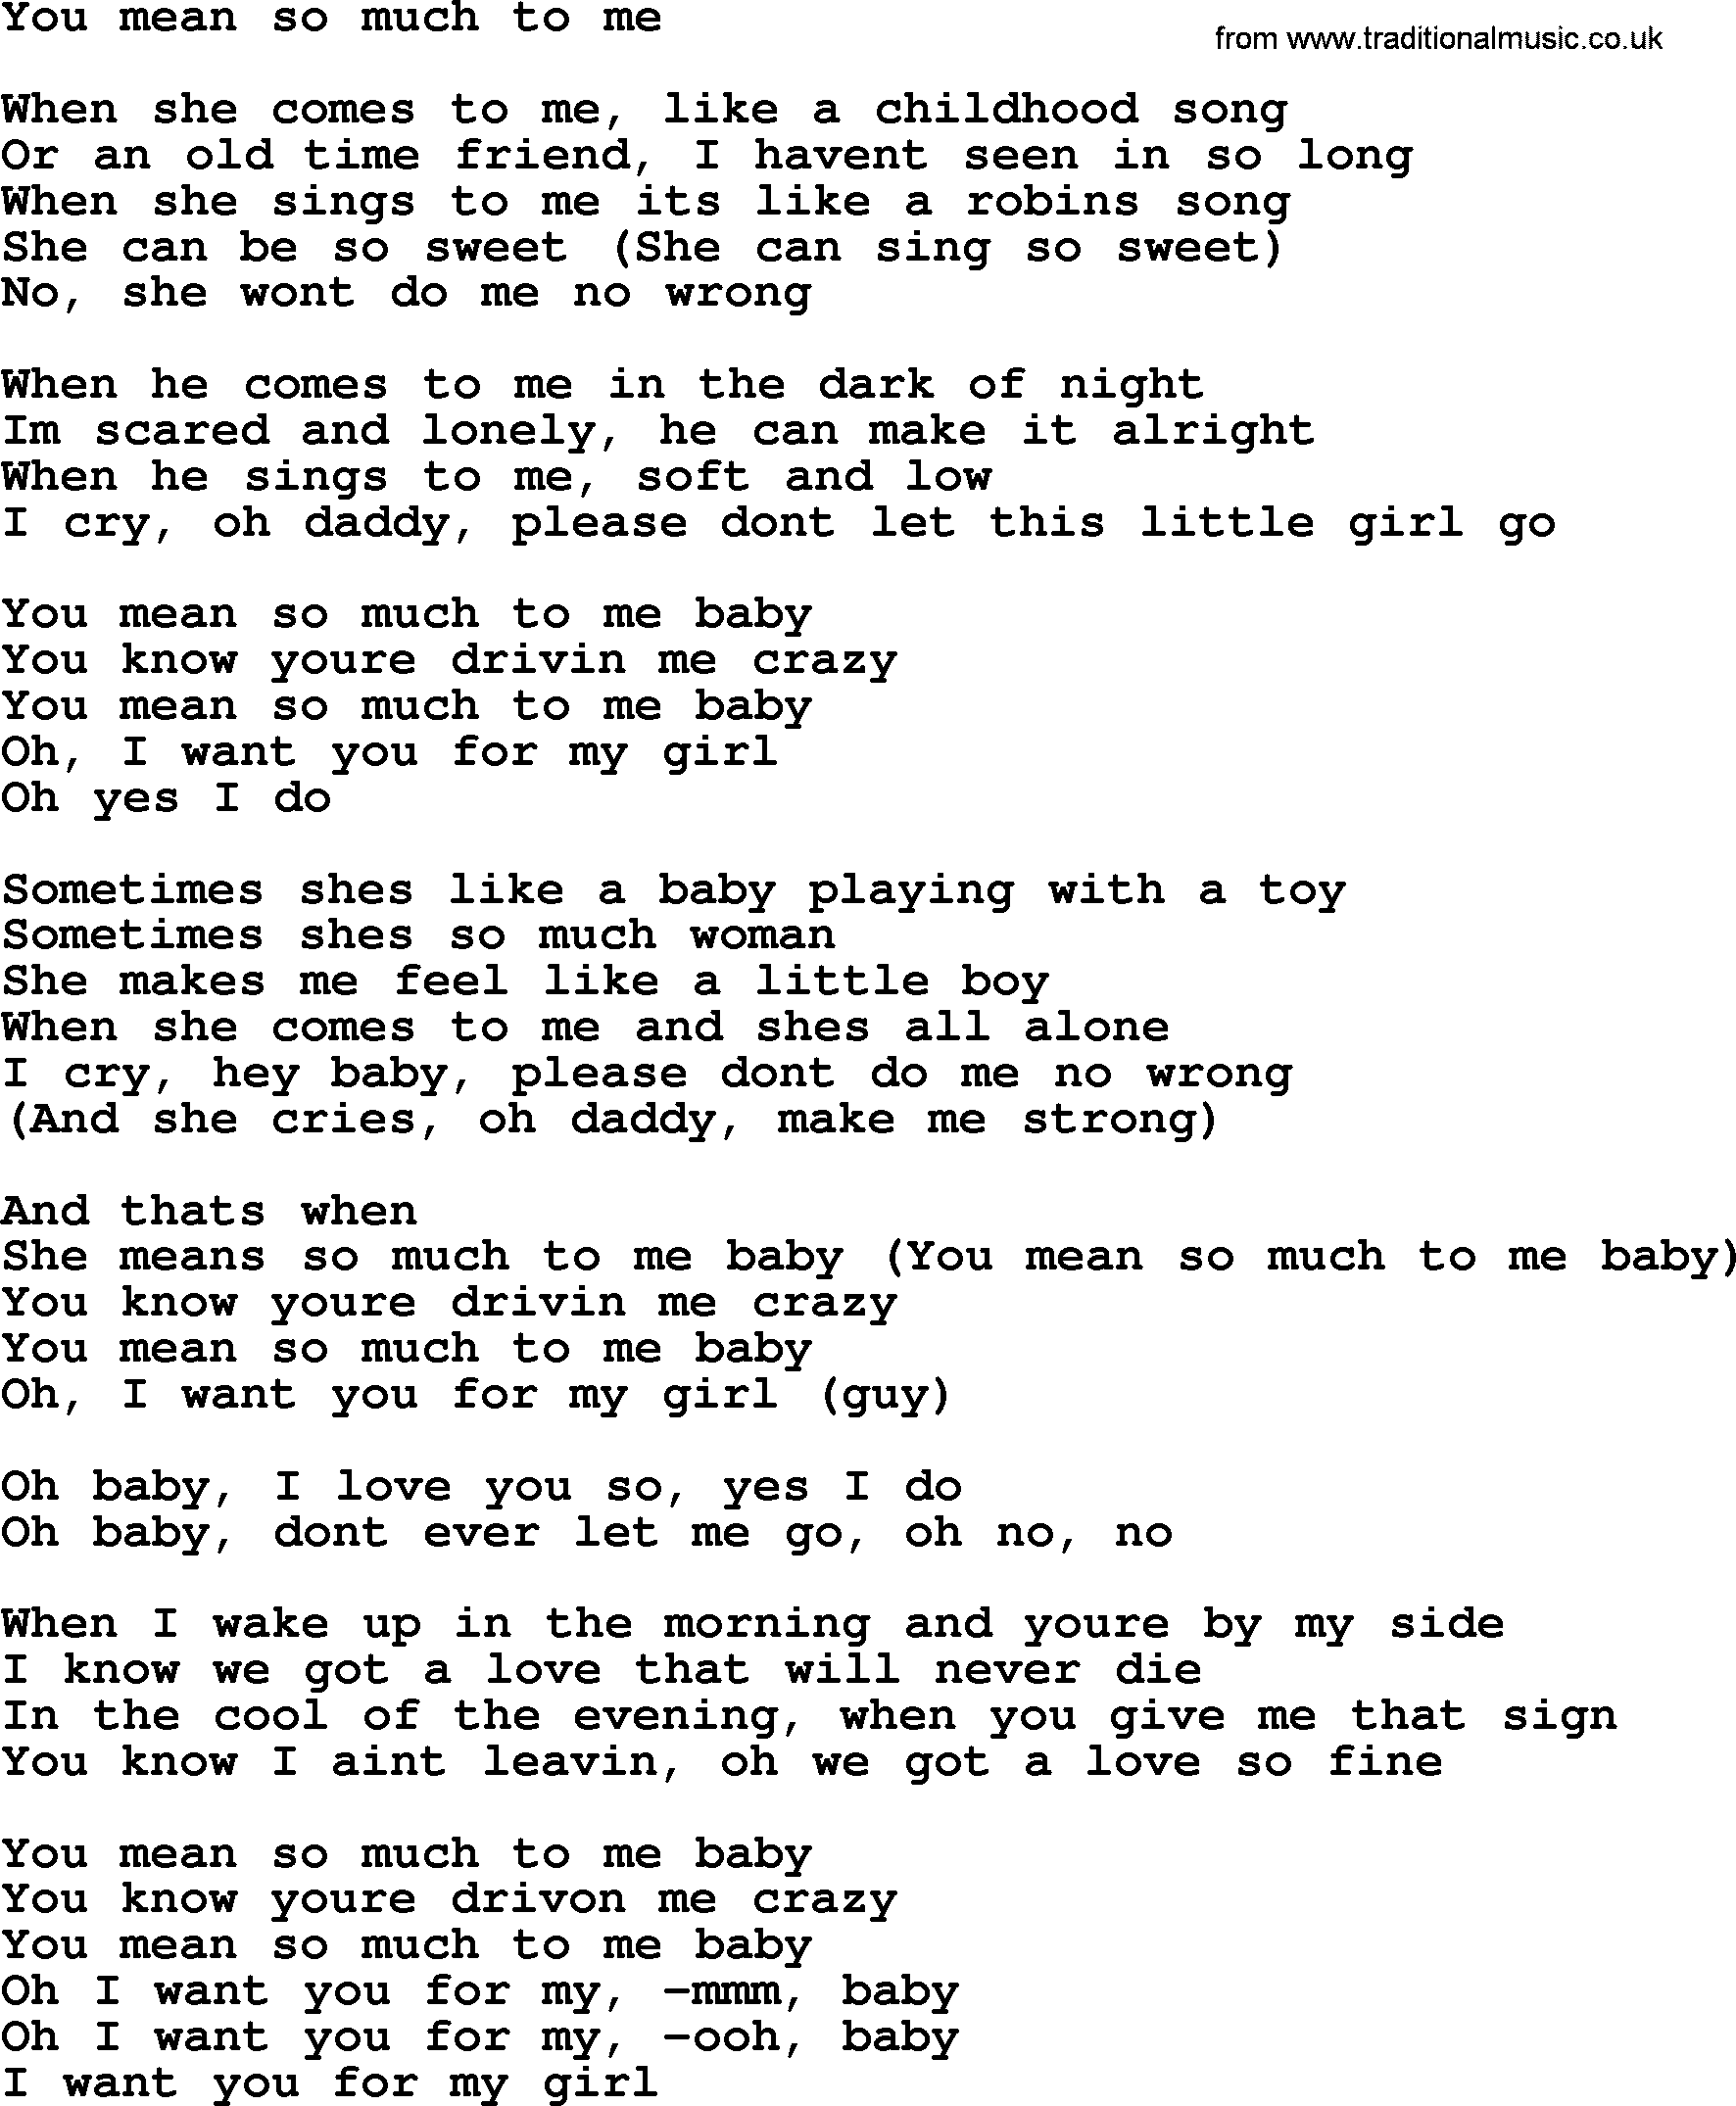 Bruce Springsteen song: You Mean So Much To Me lyrics